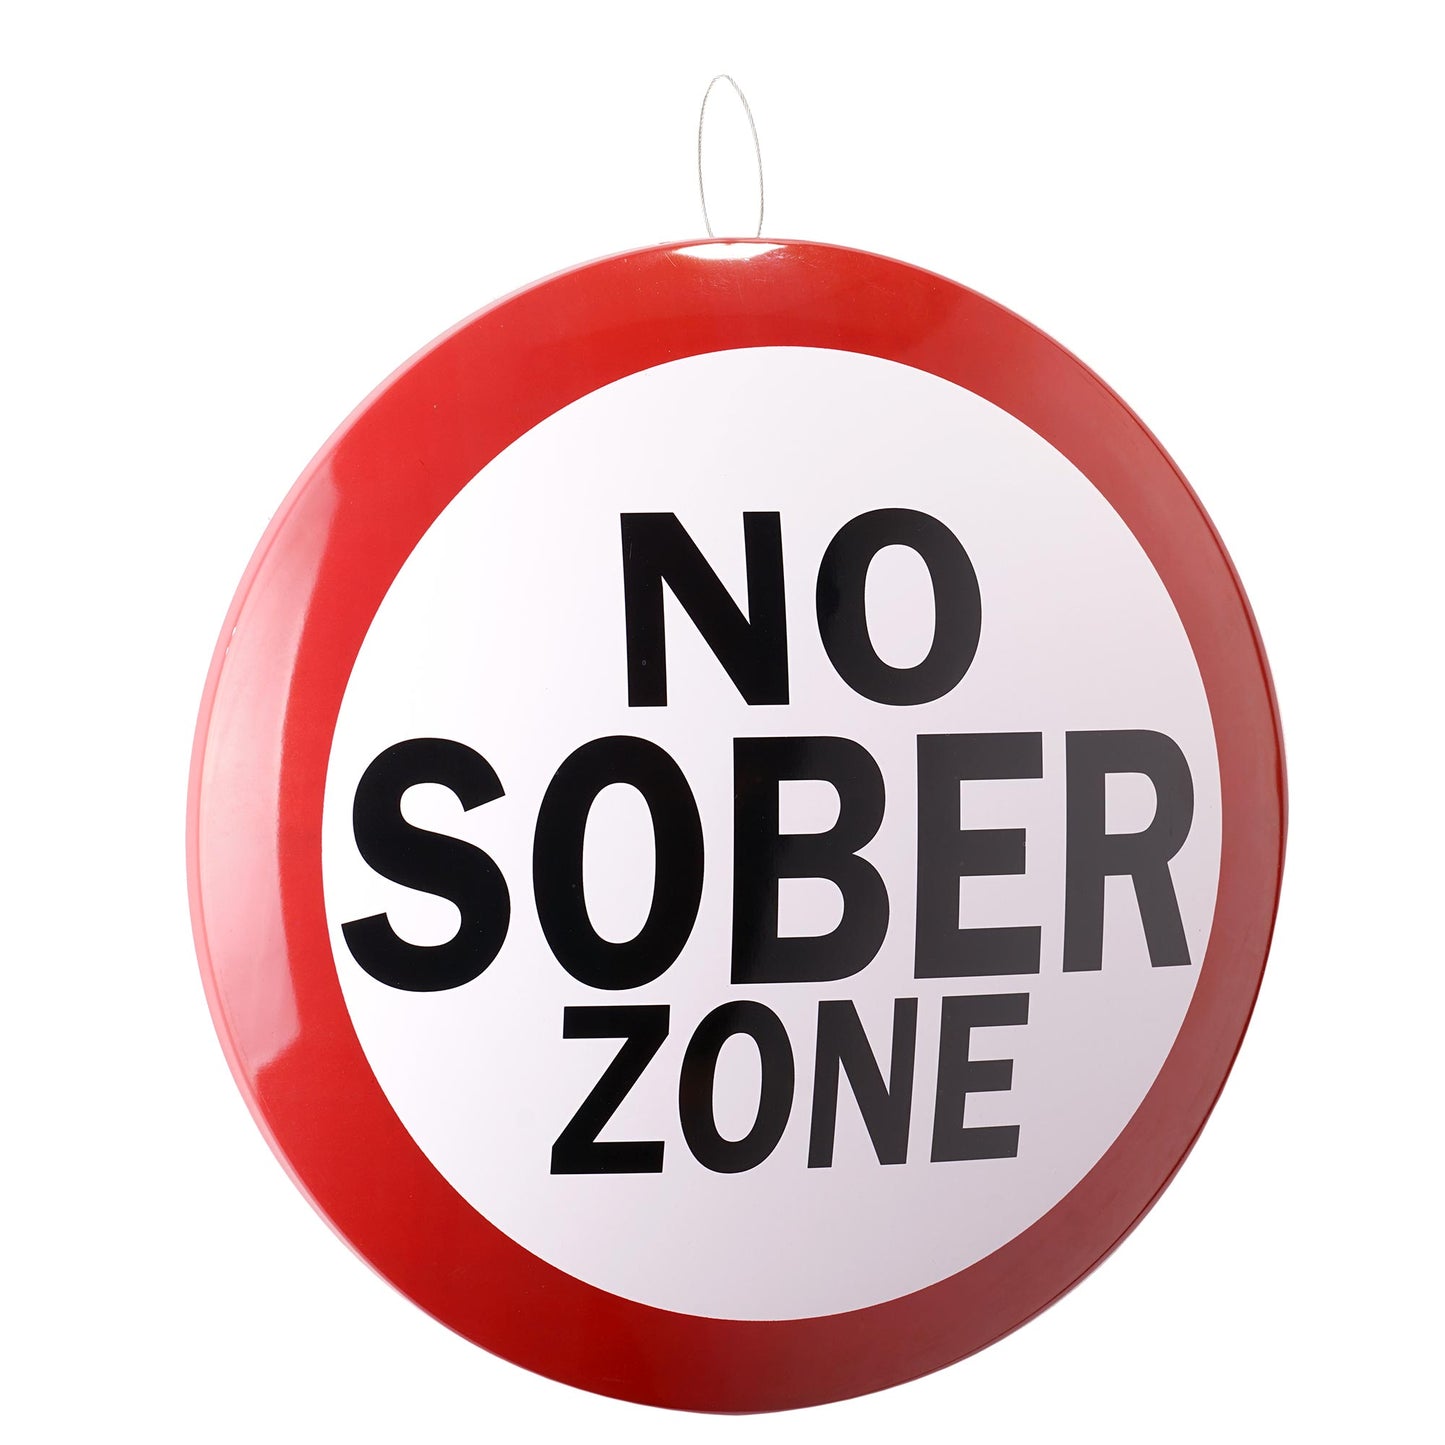 No Sober Zone Dome Metal Sign - 15.5"